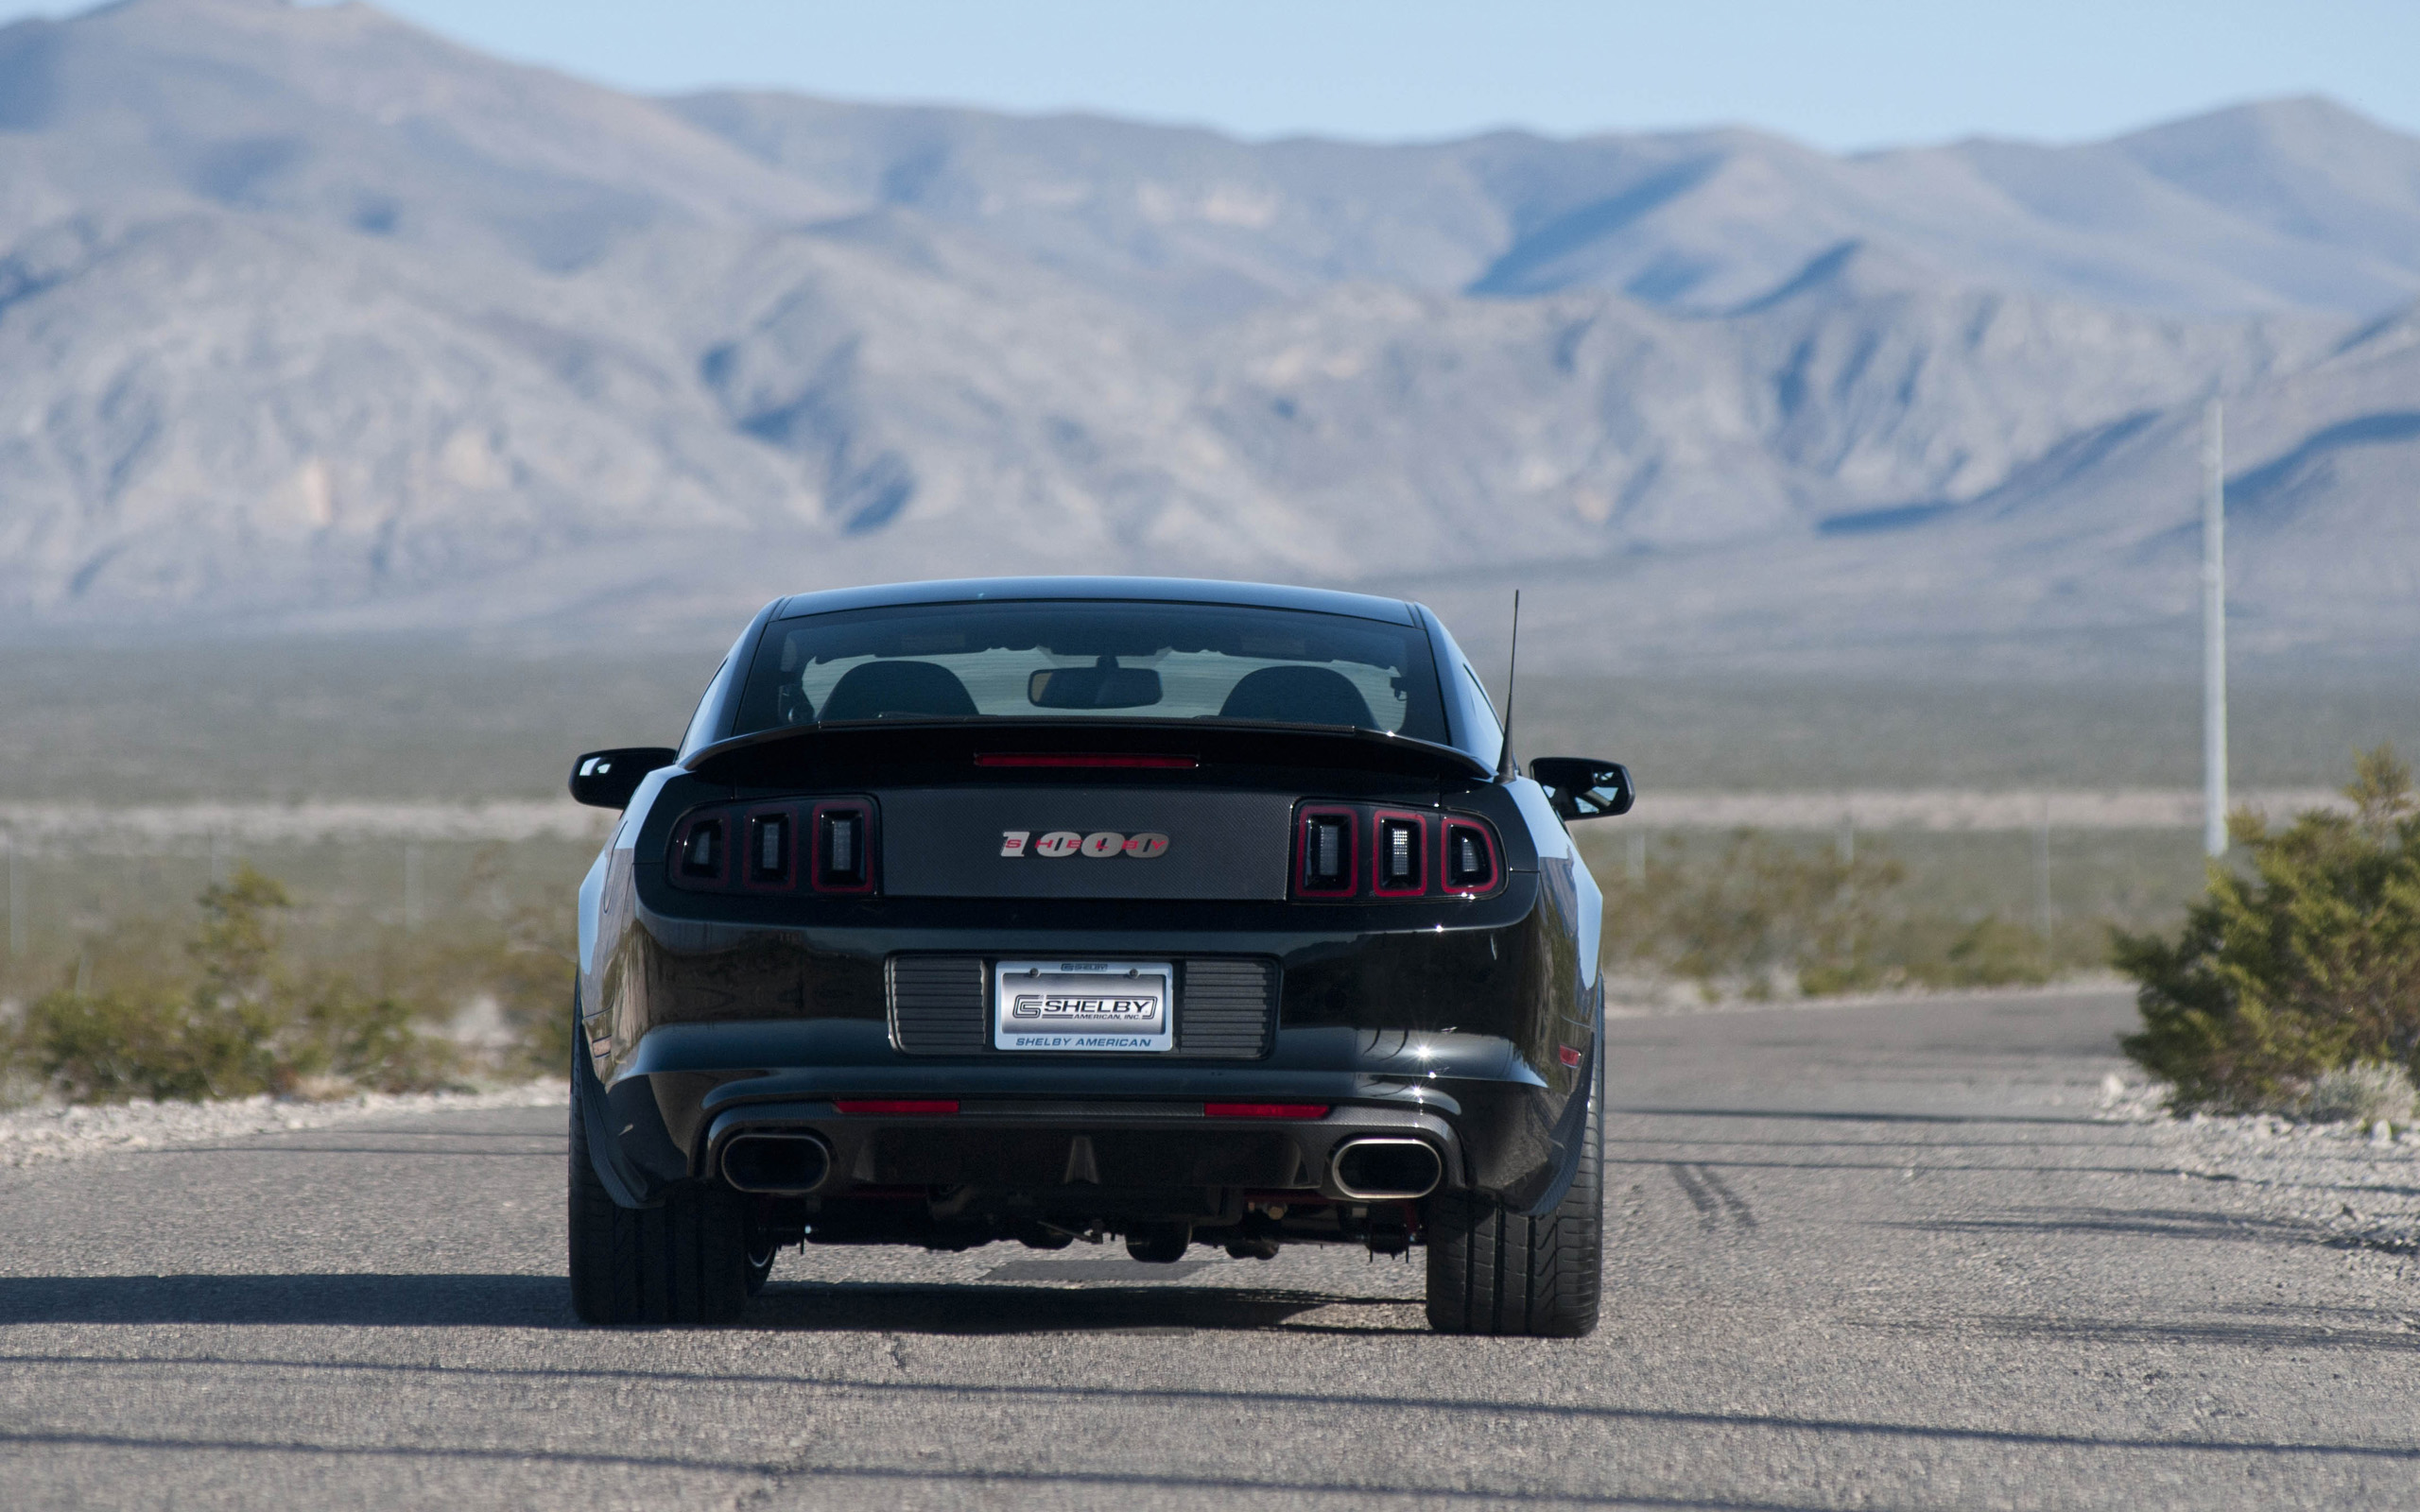 2013, Shelby, 1000, Ford, Mustang, Muscle, Supercar Wallpaper